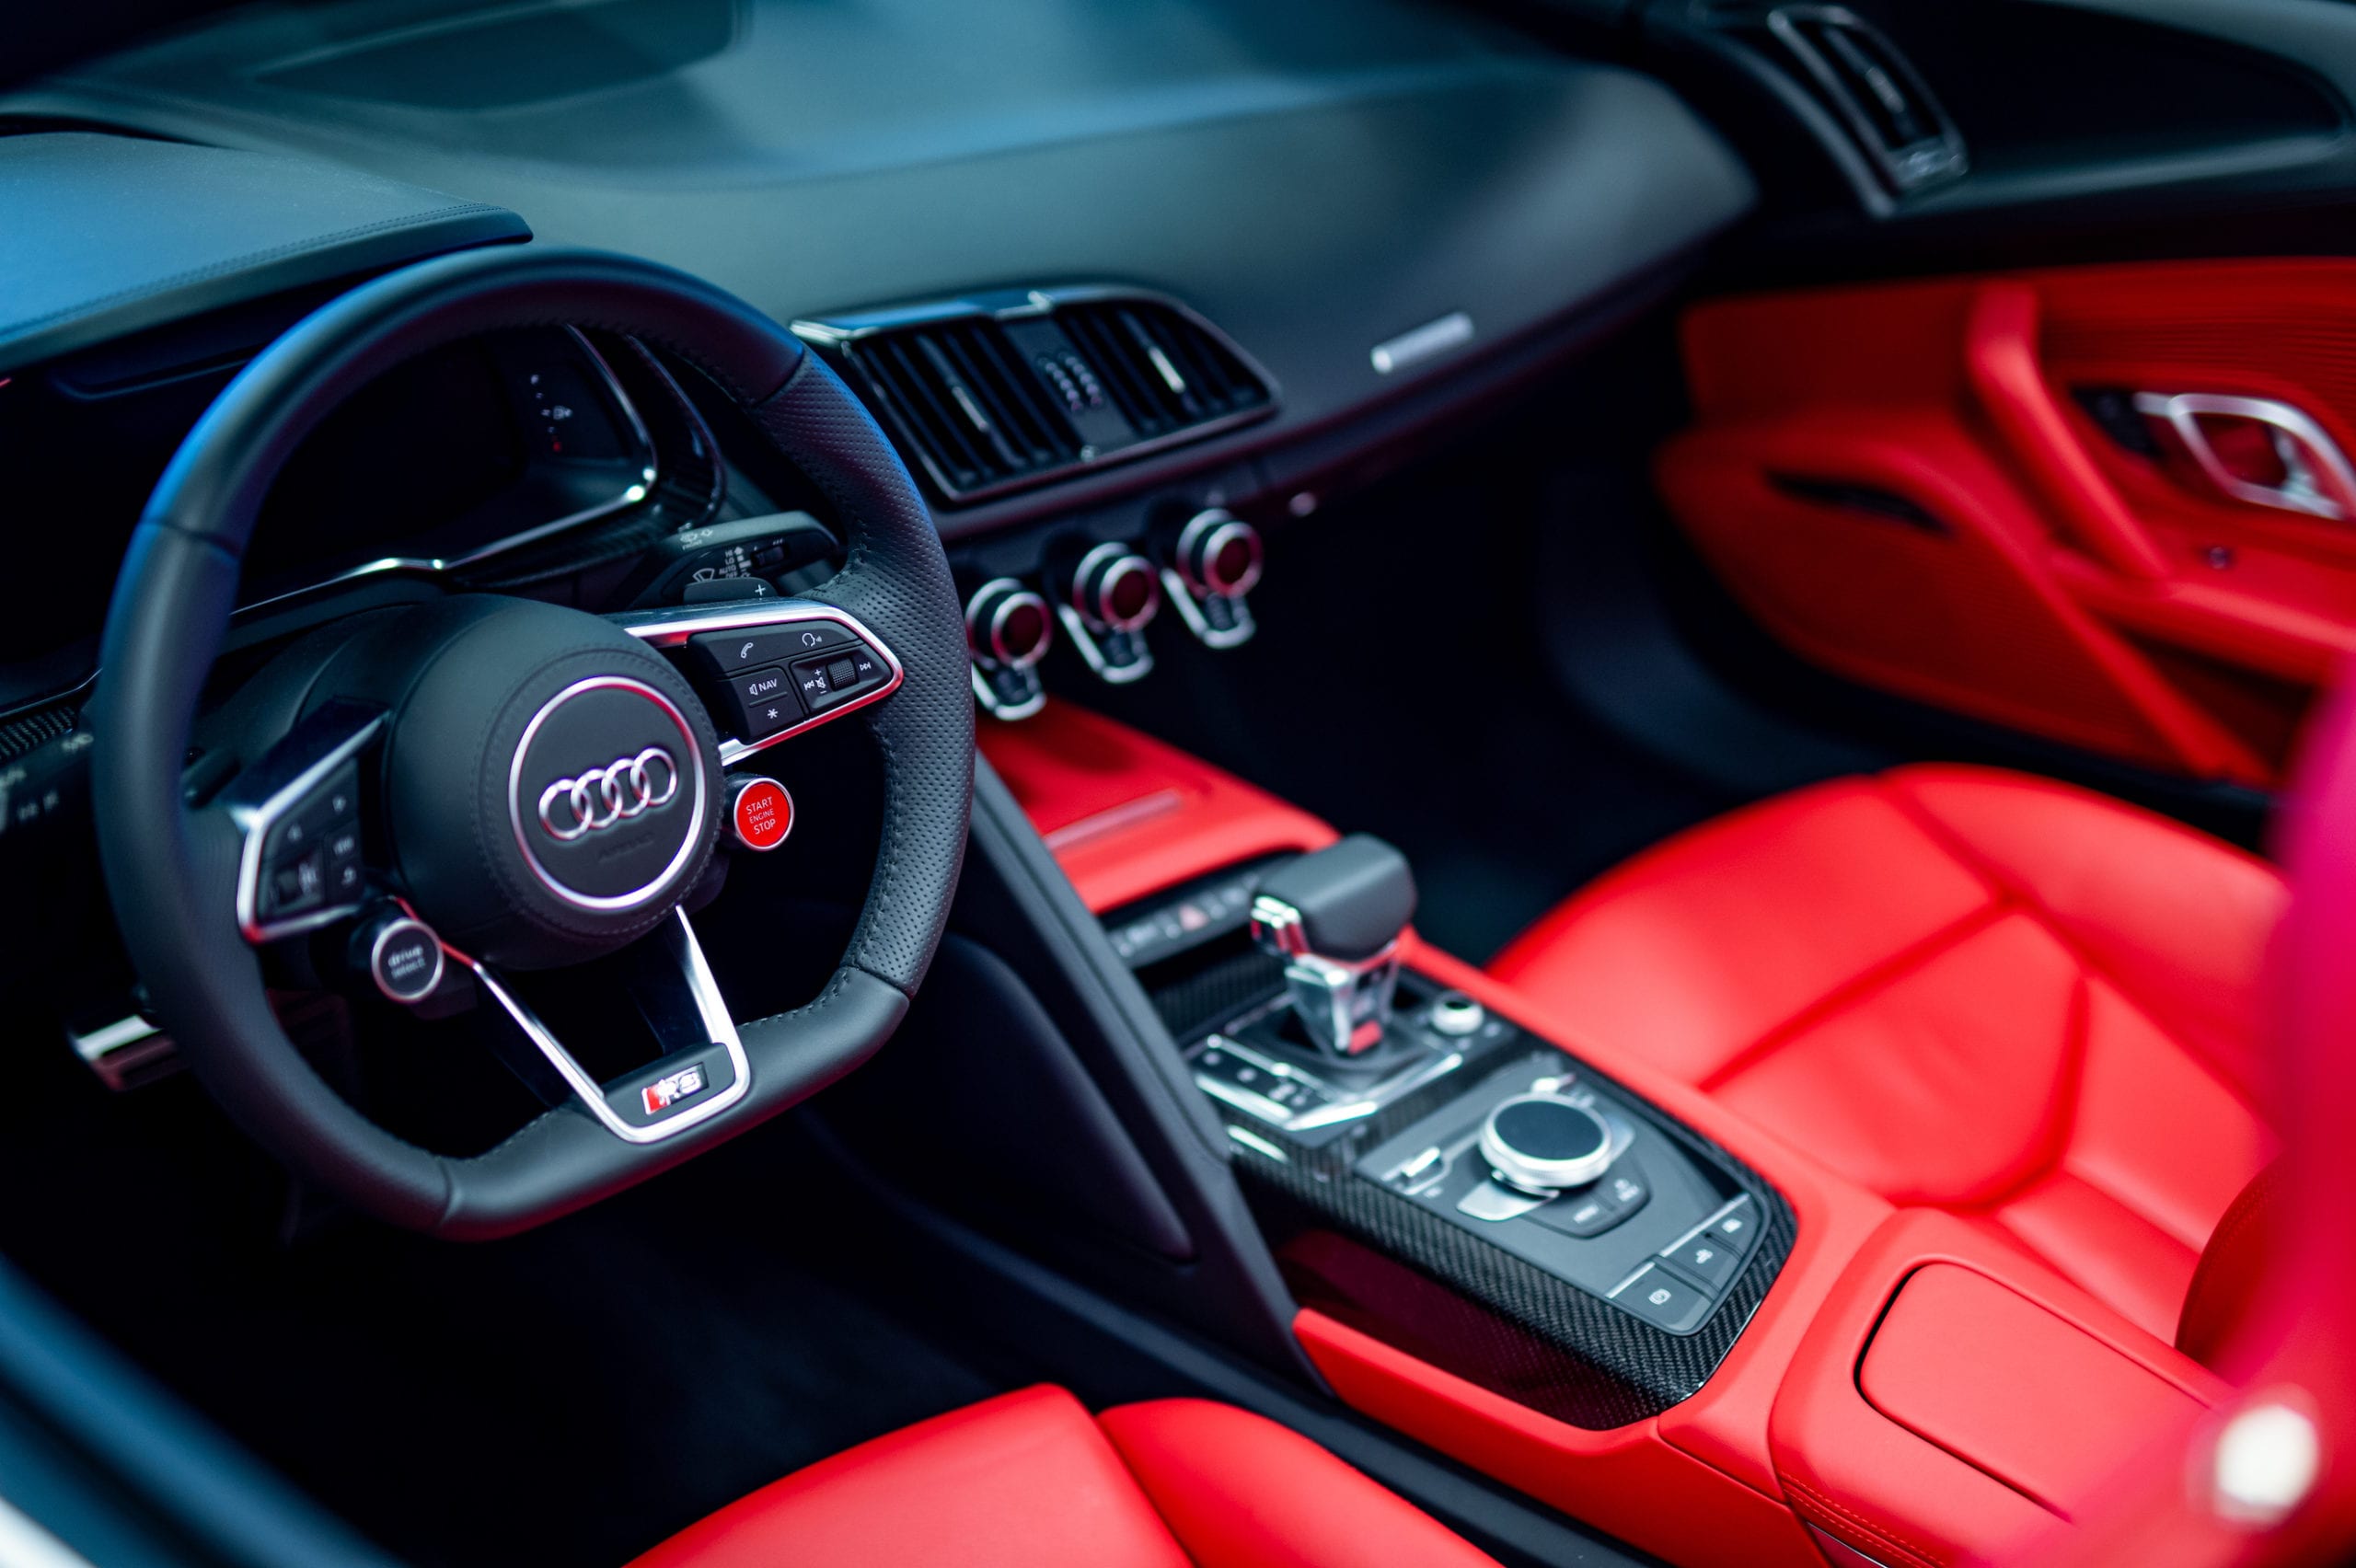 Interior view of a luxury Audi car with red leather seats